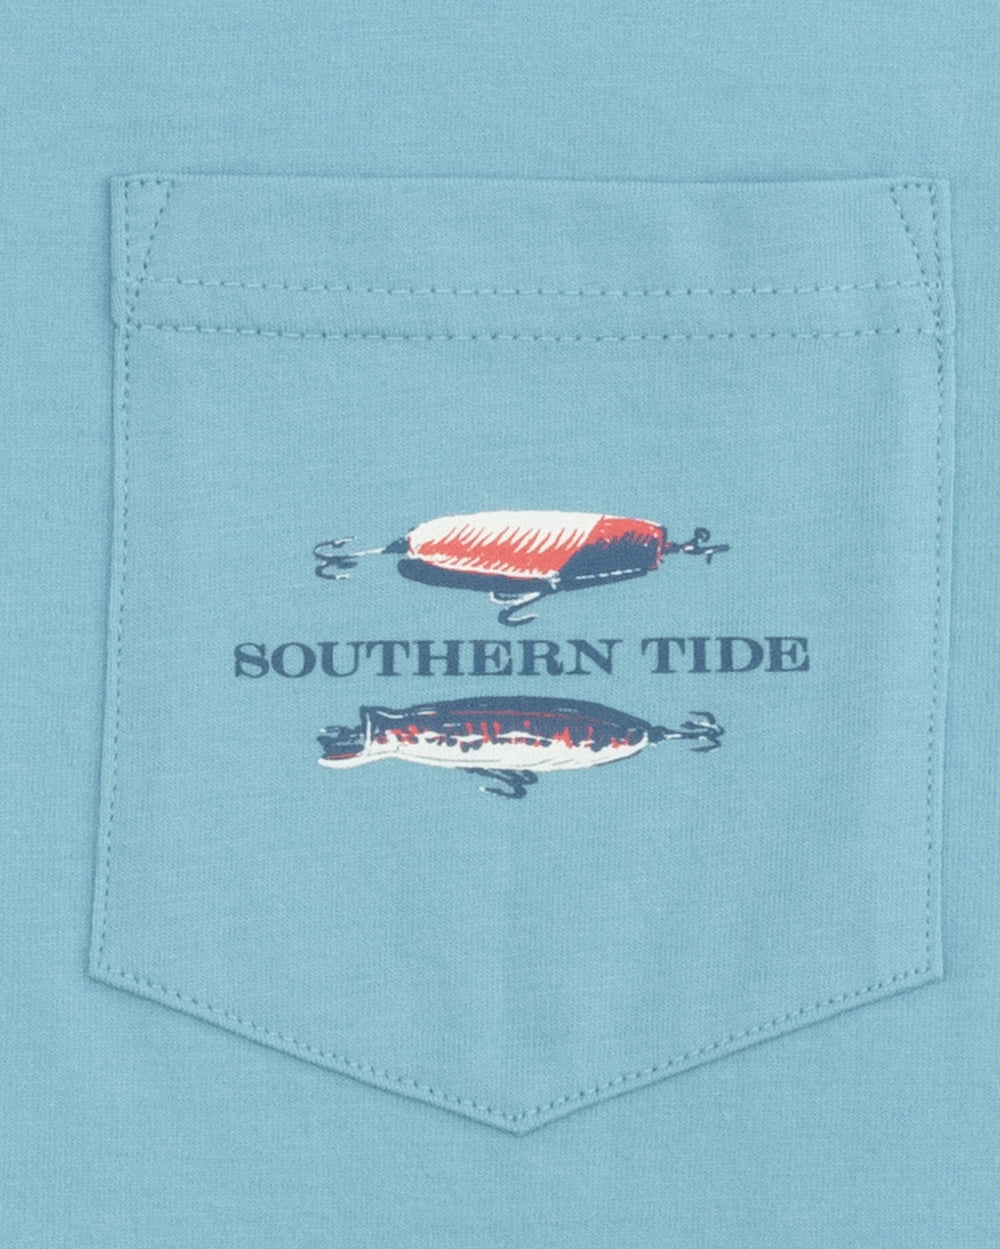 The pocket view of the Men's Bobbers and Lures Tide T-Shirt by Southern Tide - Brisk Blue